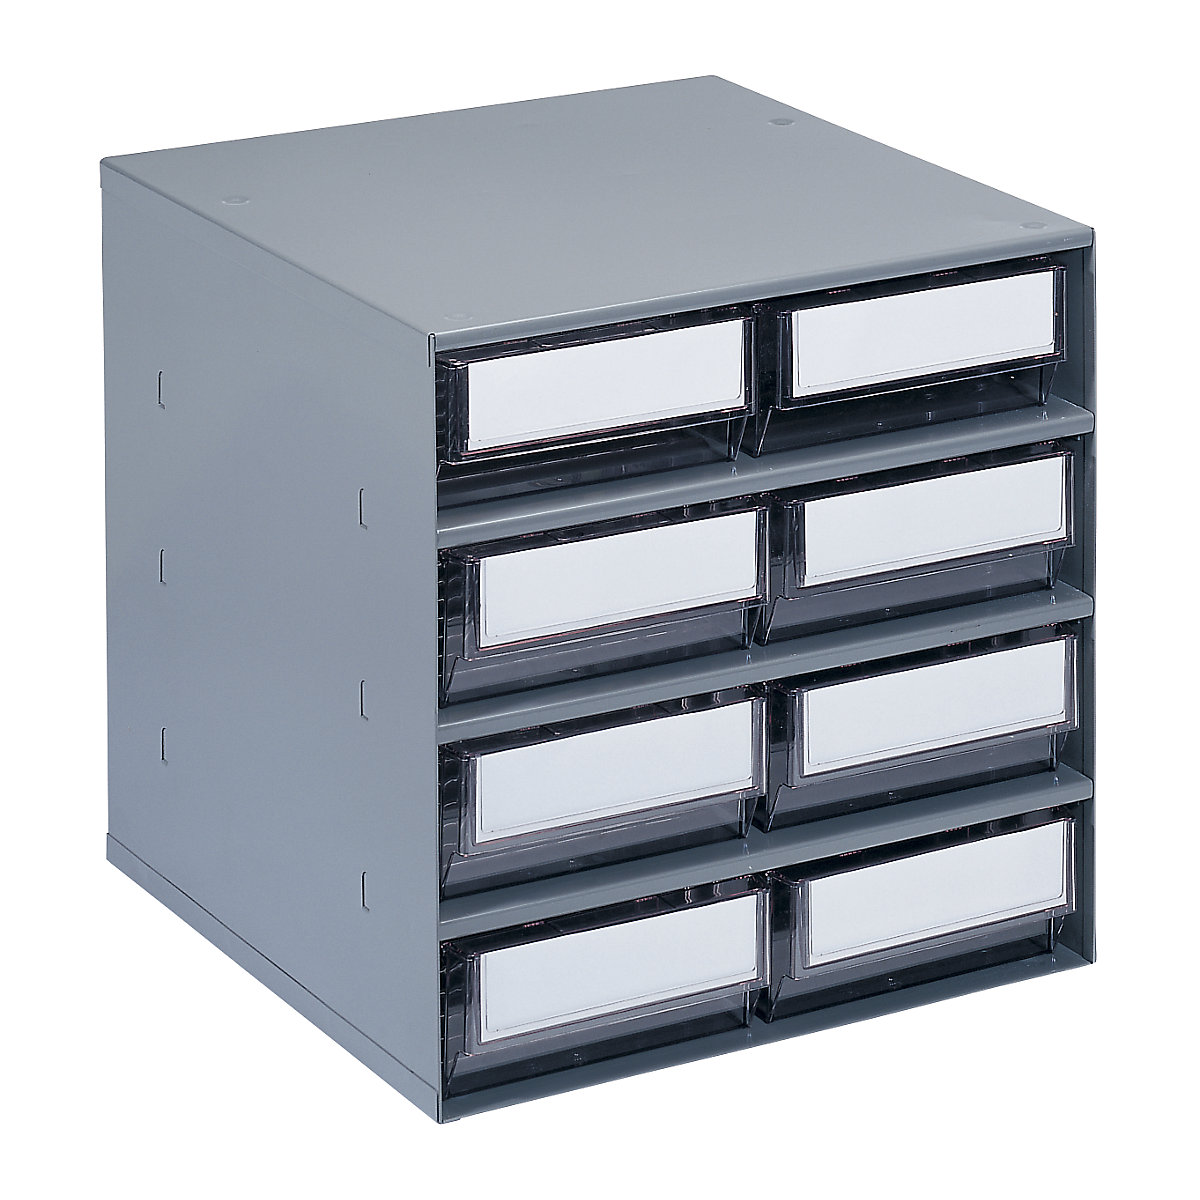 Drawer cabinet, max. housing load 75 kg, HxWxD 395 x 376 x 300 mm, 8 drawers, transparent drawers-4